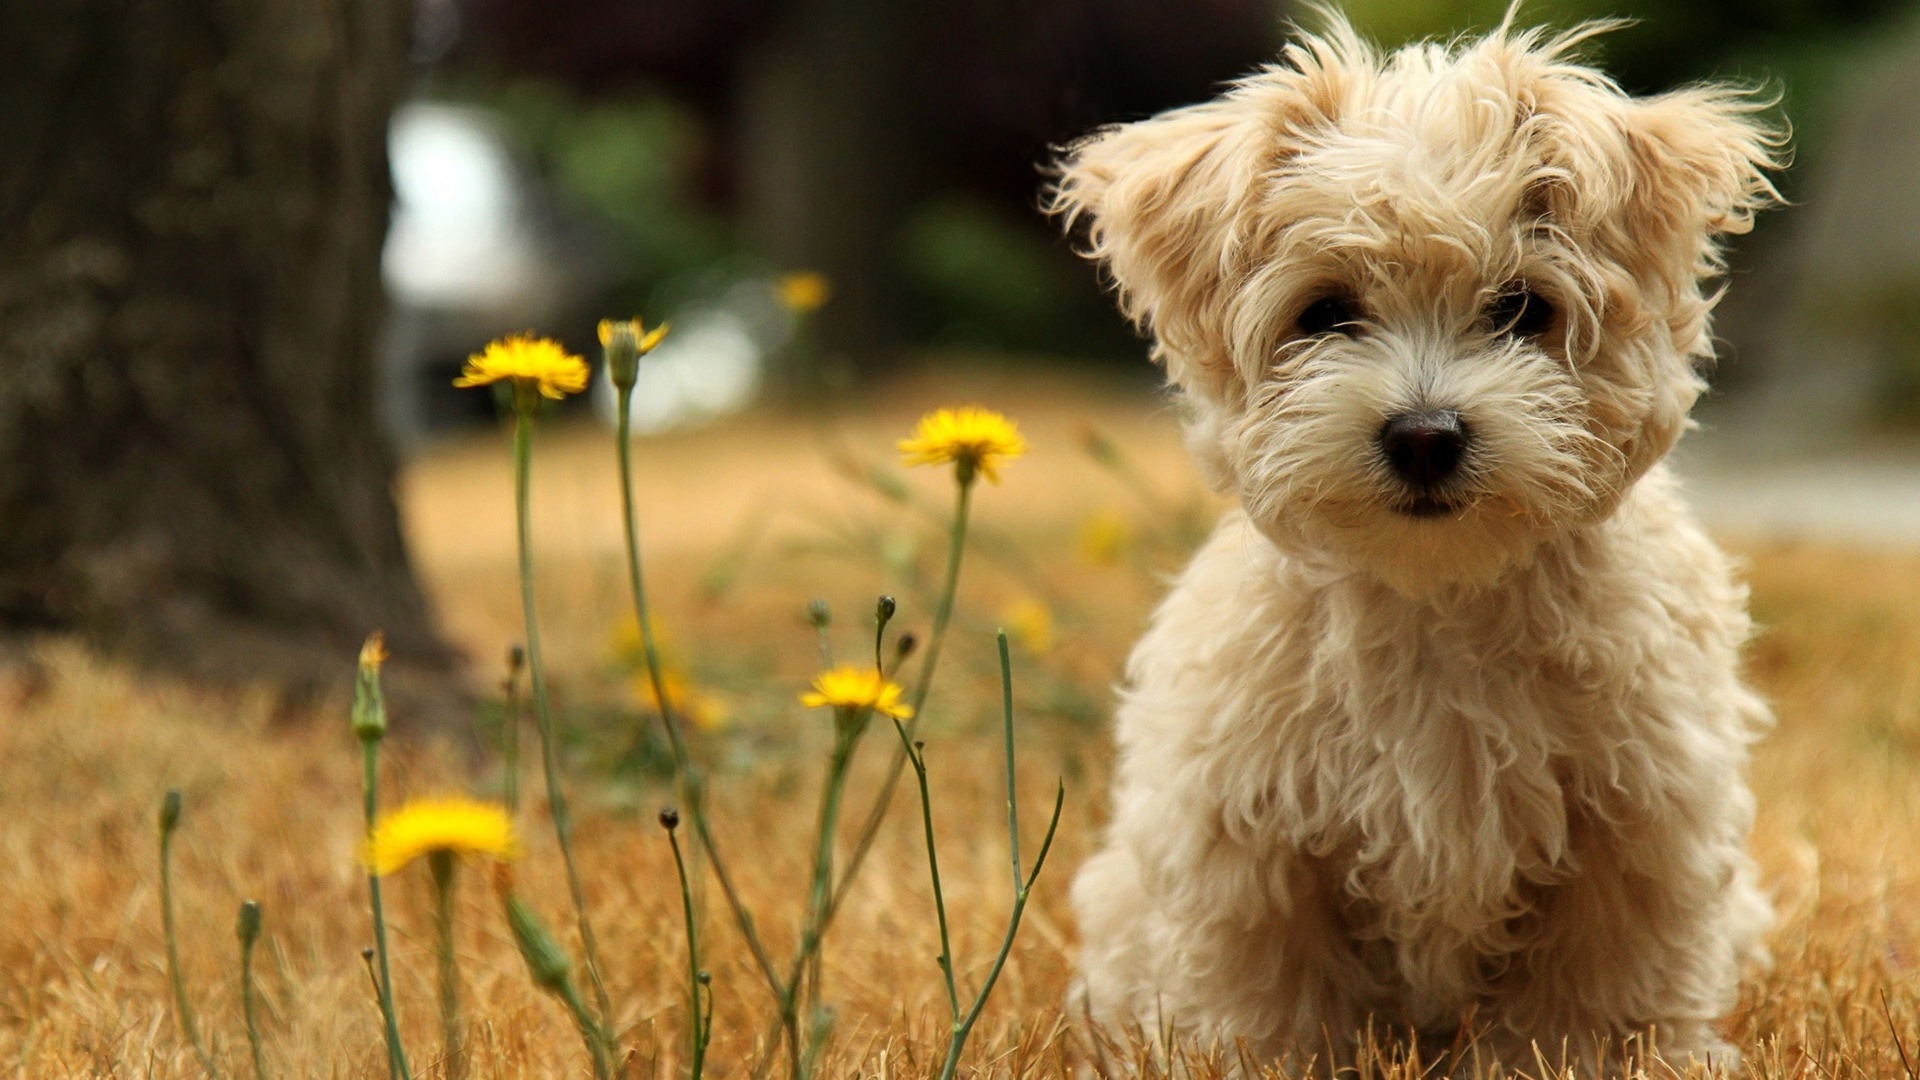 Cute Puppy for 1920 x 1080 HDTV 1080p resolution